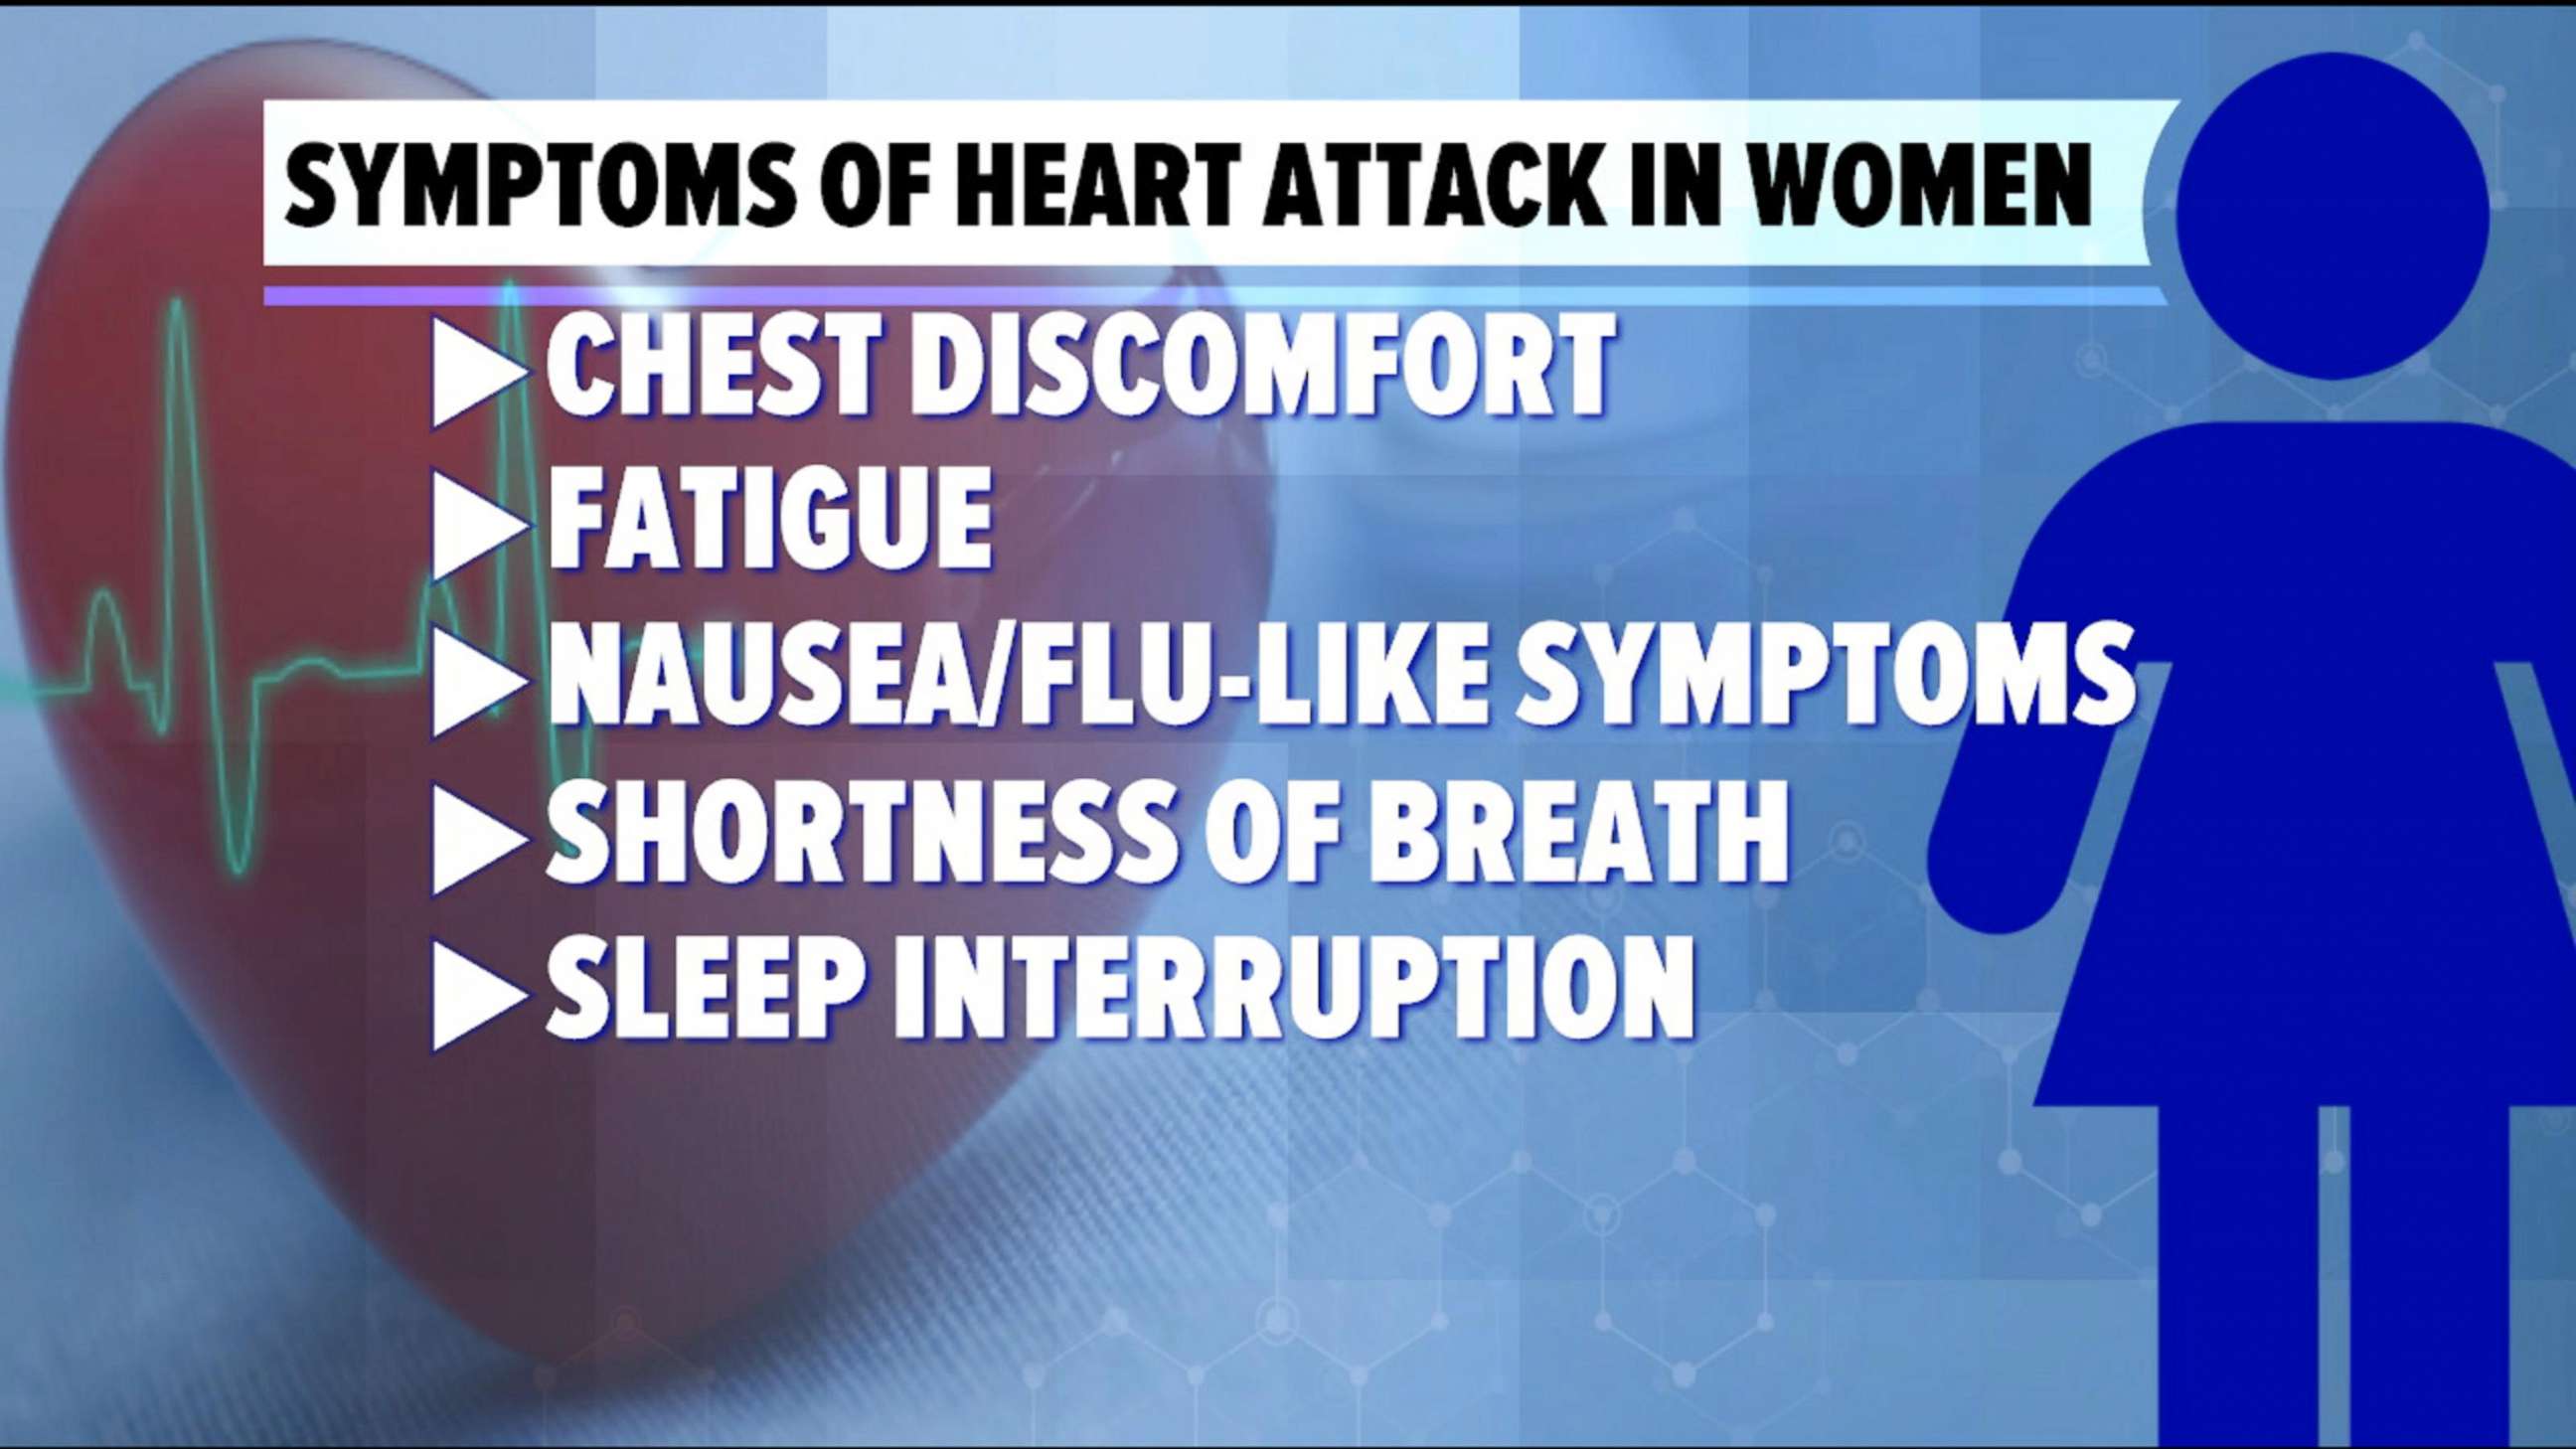 GRAPHIC: A graphic lists symptoms of heart attacks in women.